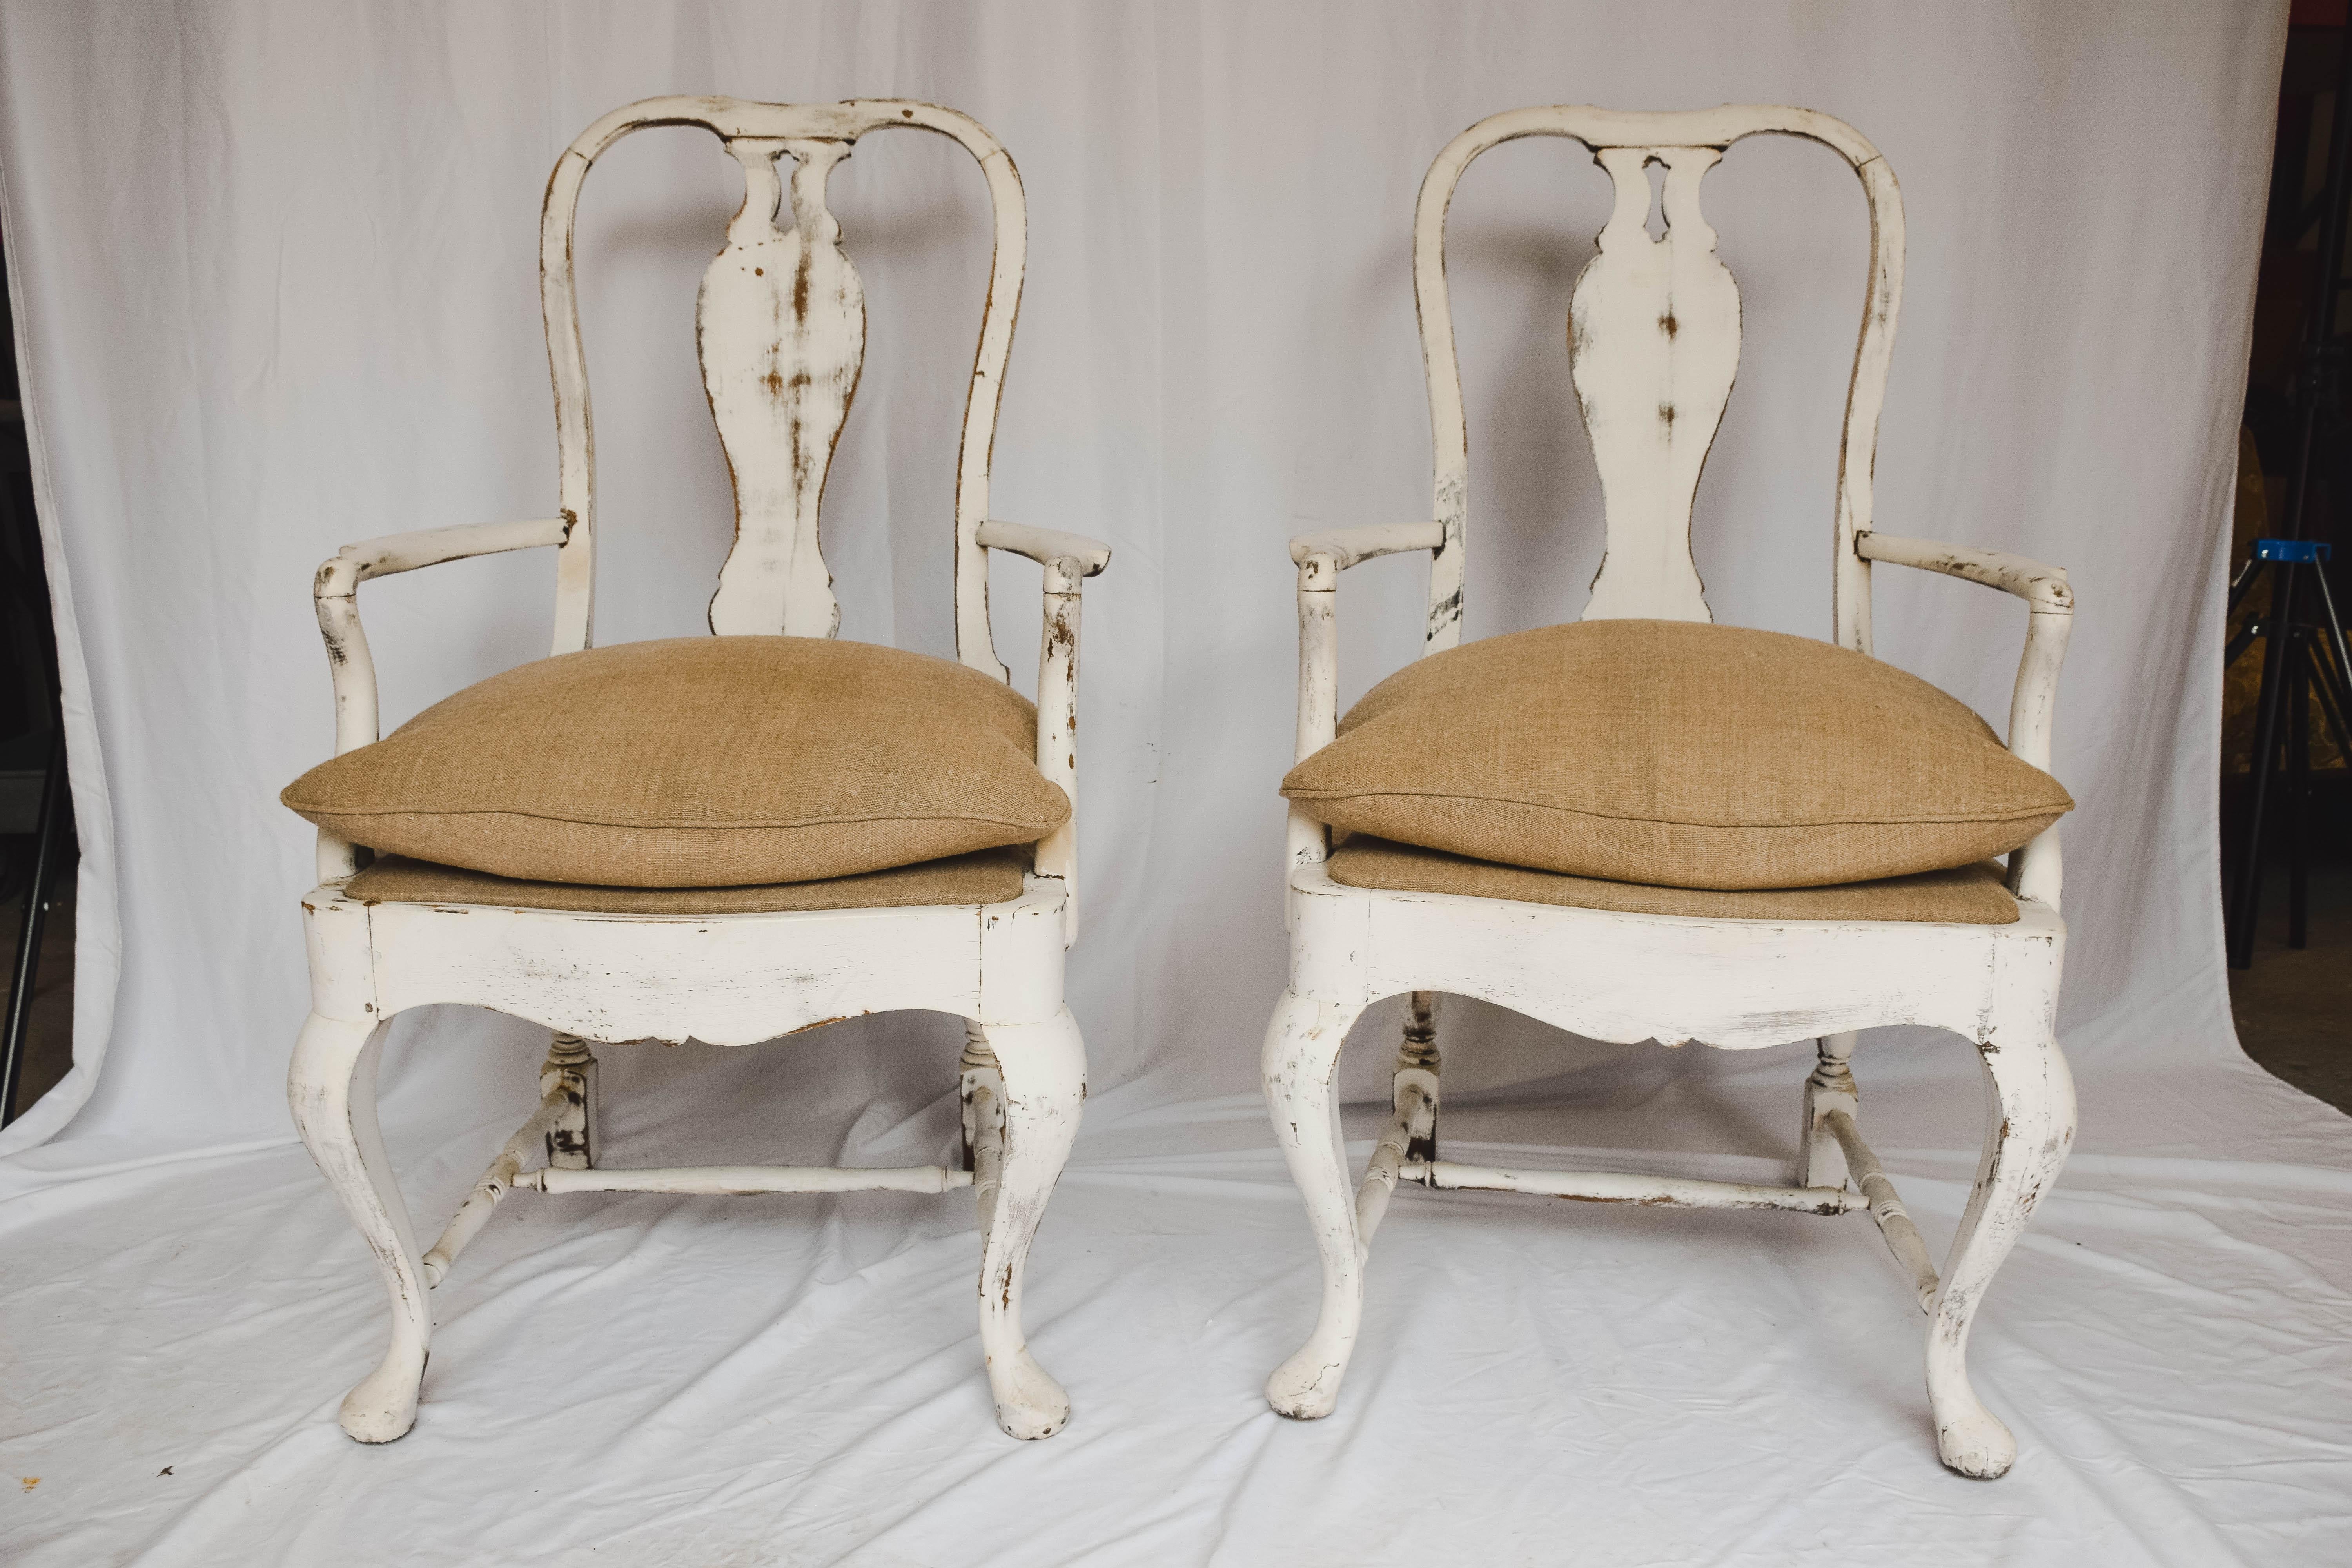 This lovely pair of Swedish arm chairs were likely from a Swedish farm house. The two armchairs have been painted white and lightly scraped creating a nice contrast with the darker wood beneath. The chairs with beautifully curved backs and arms and